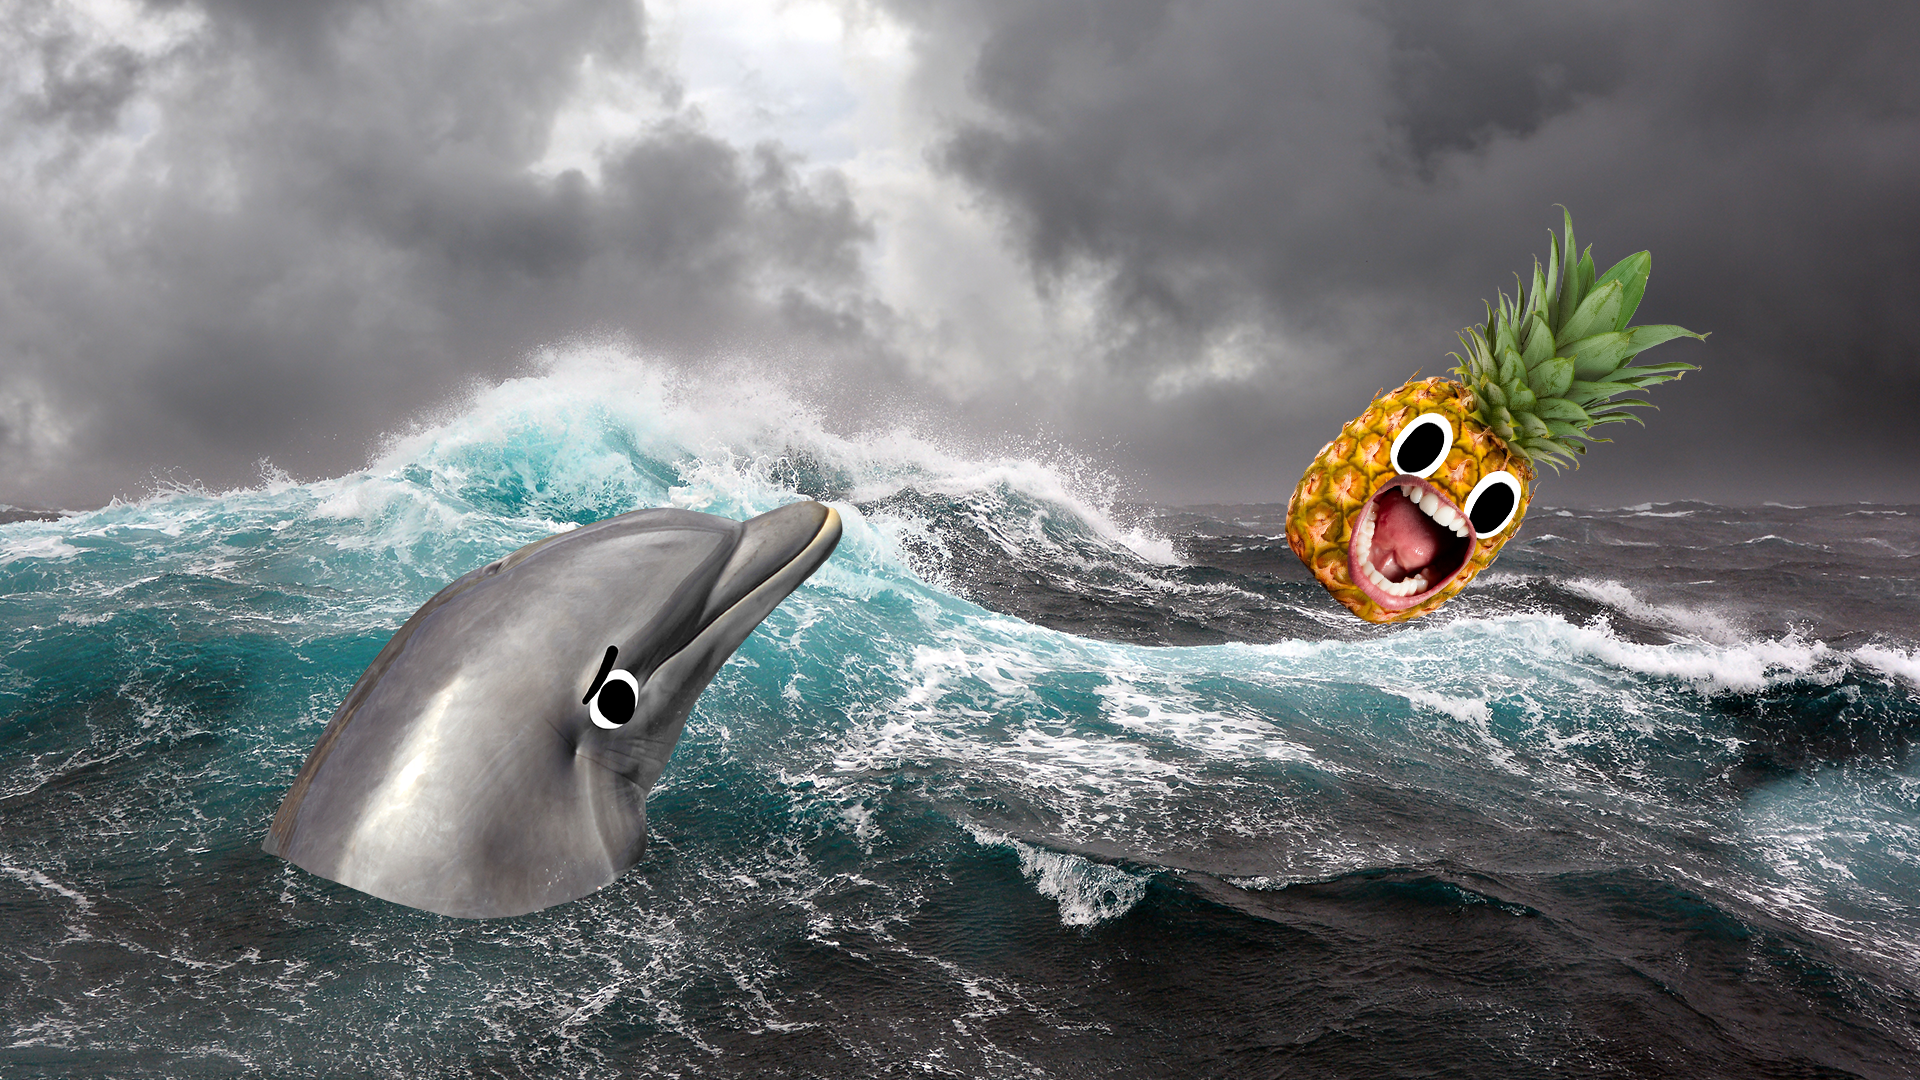 Dolphin and pineapple in stormy sea